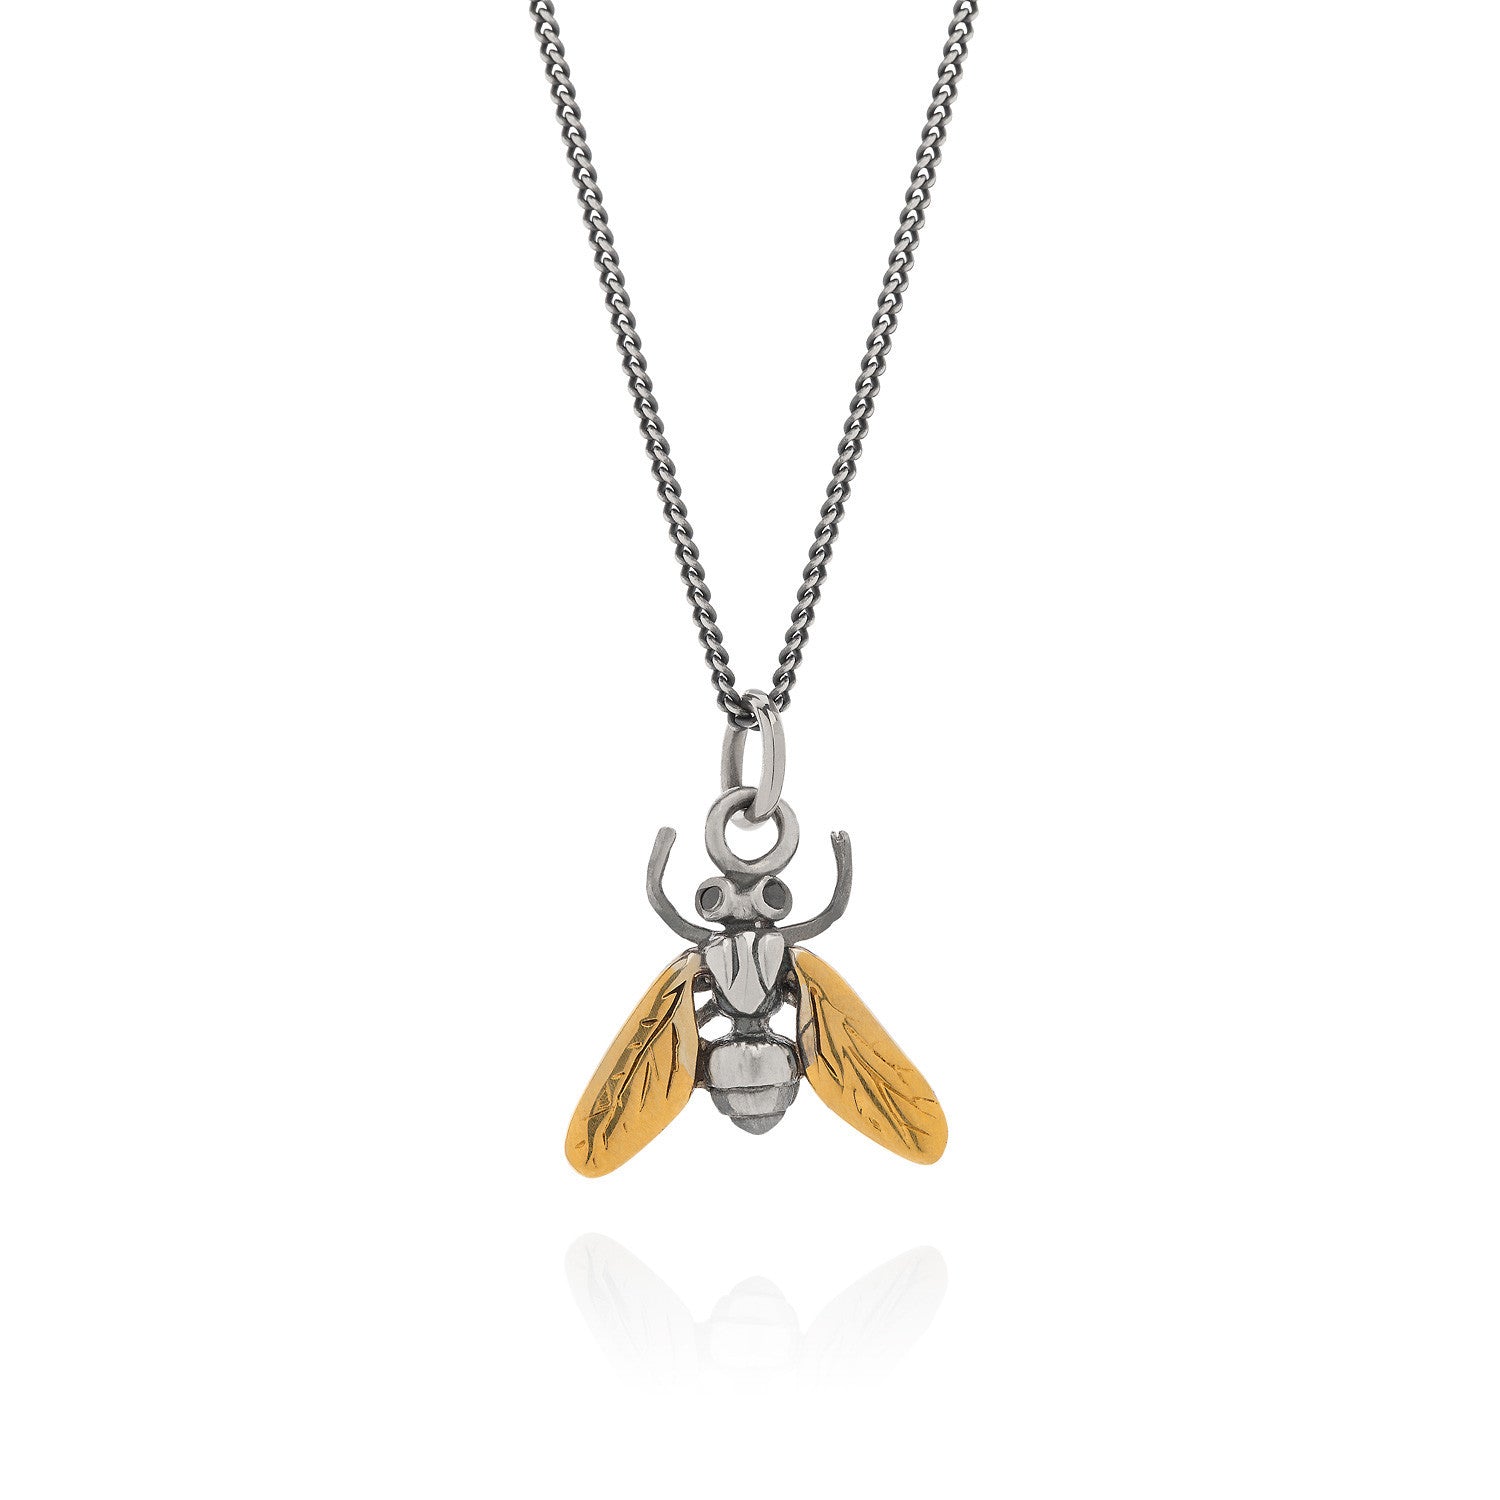 Gilded Hoverfly Necklace with Black Diamonds